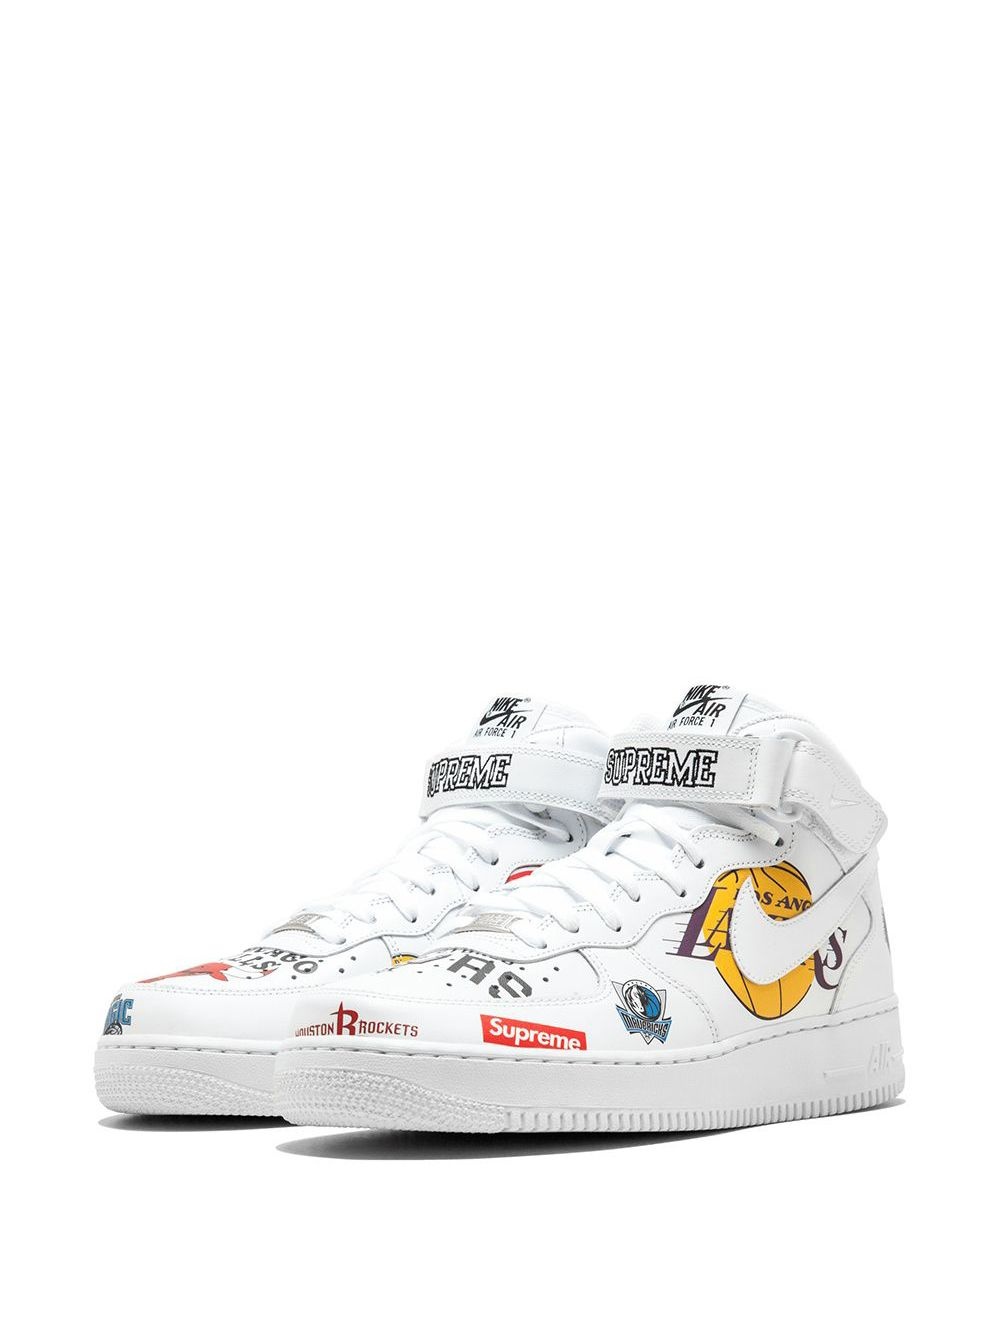 x Supreme x NBA x Air Force 1 MID 07 sneakers - 2